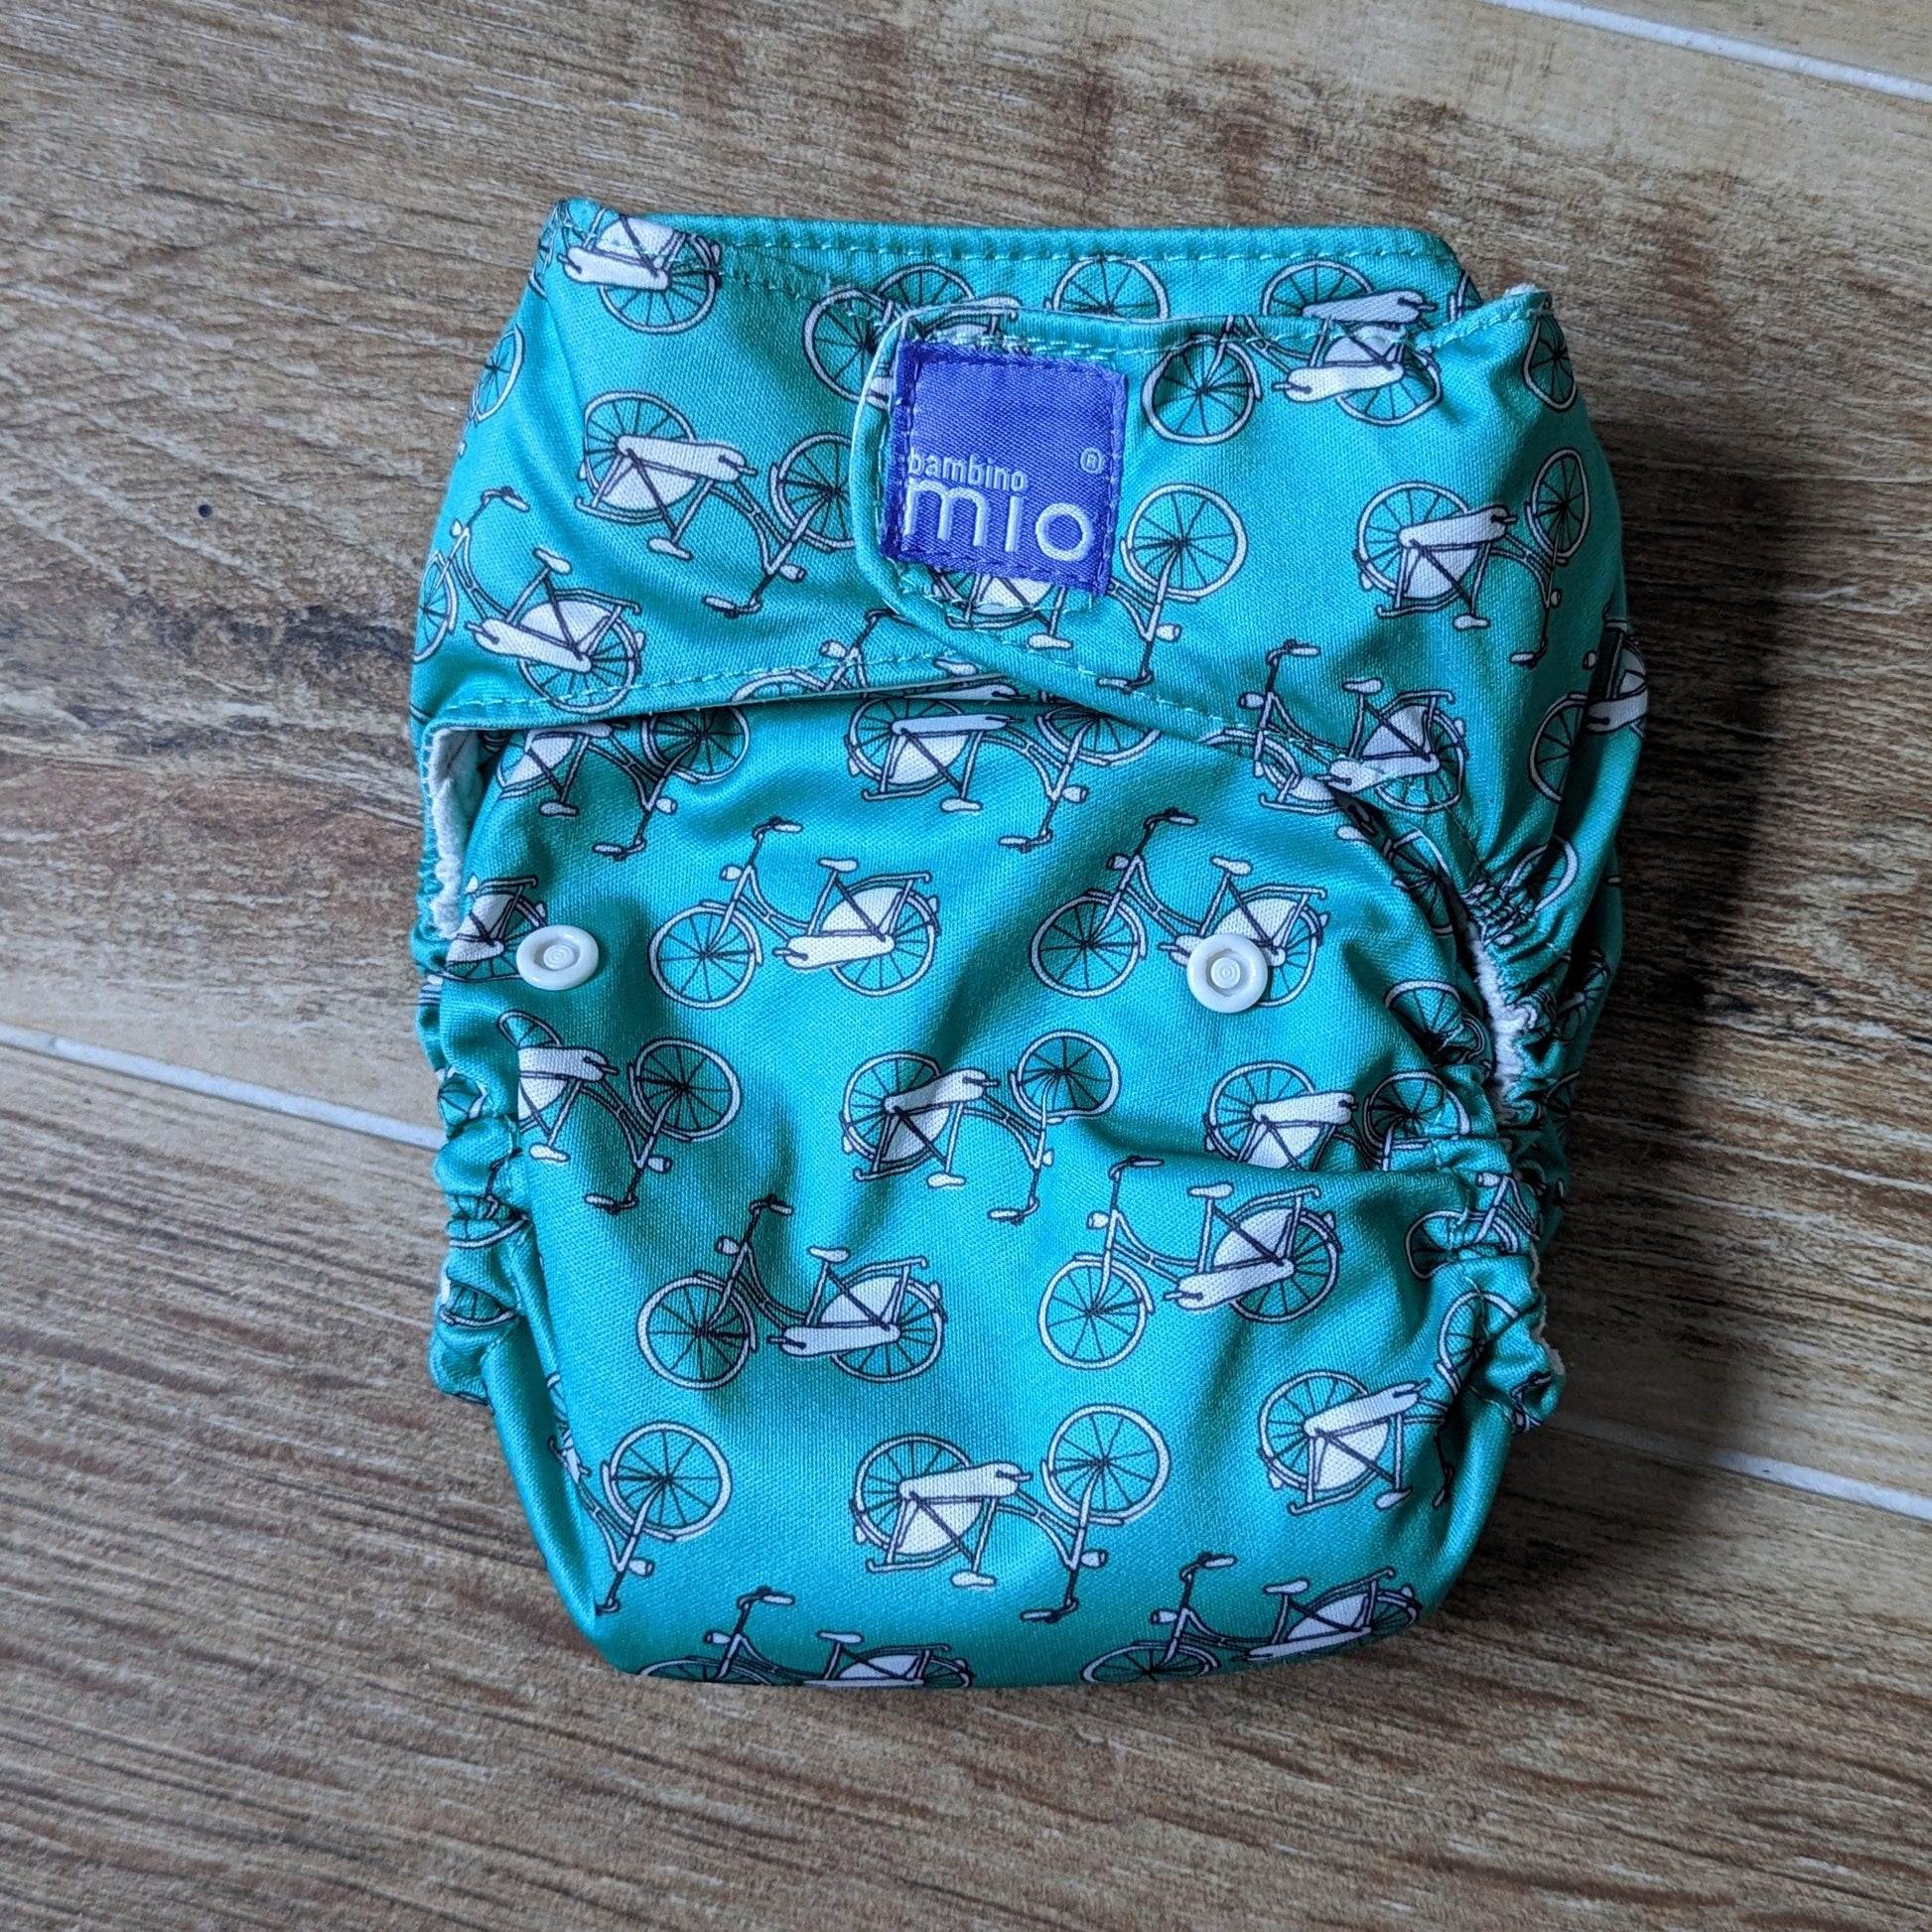 Bambino Mio Solo All in One Nappy-All In One Nappy-Bambio Mio-Bicycles-The Nappy Market